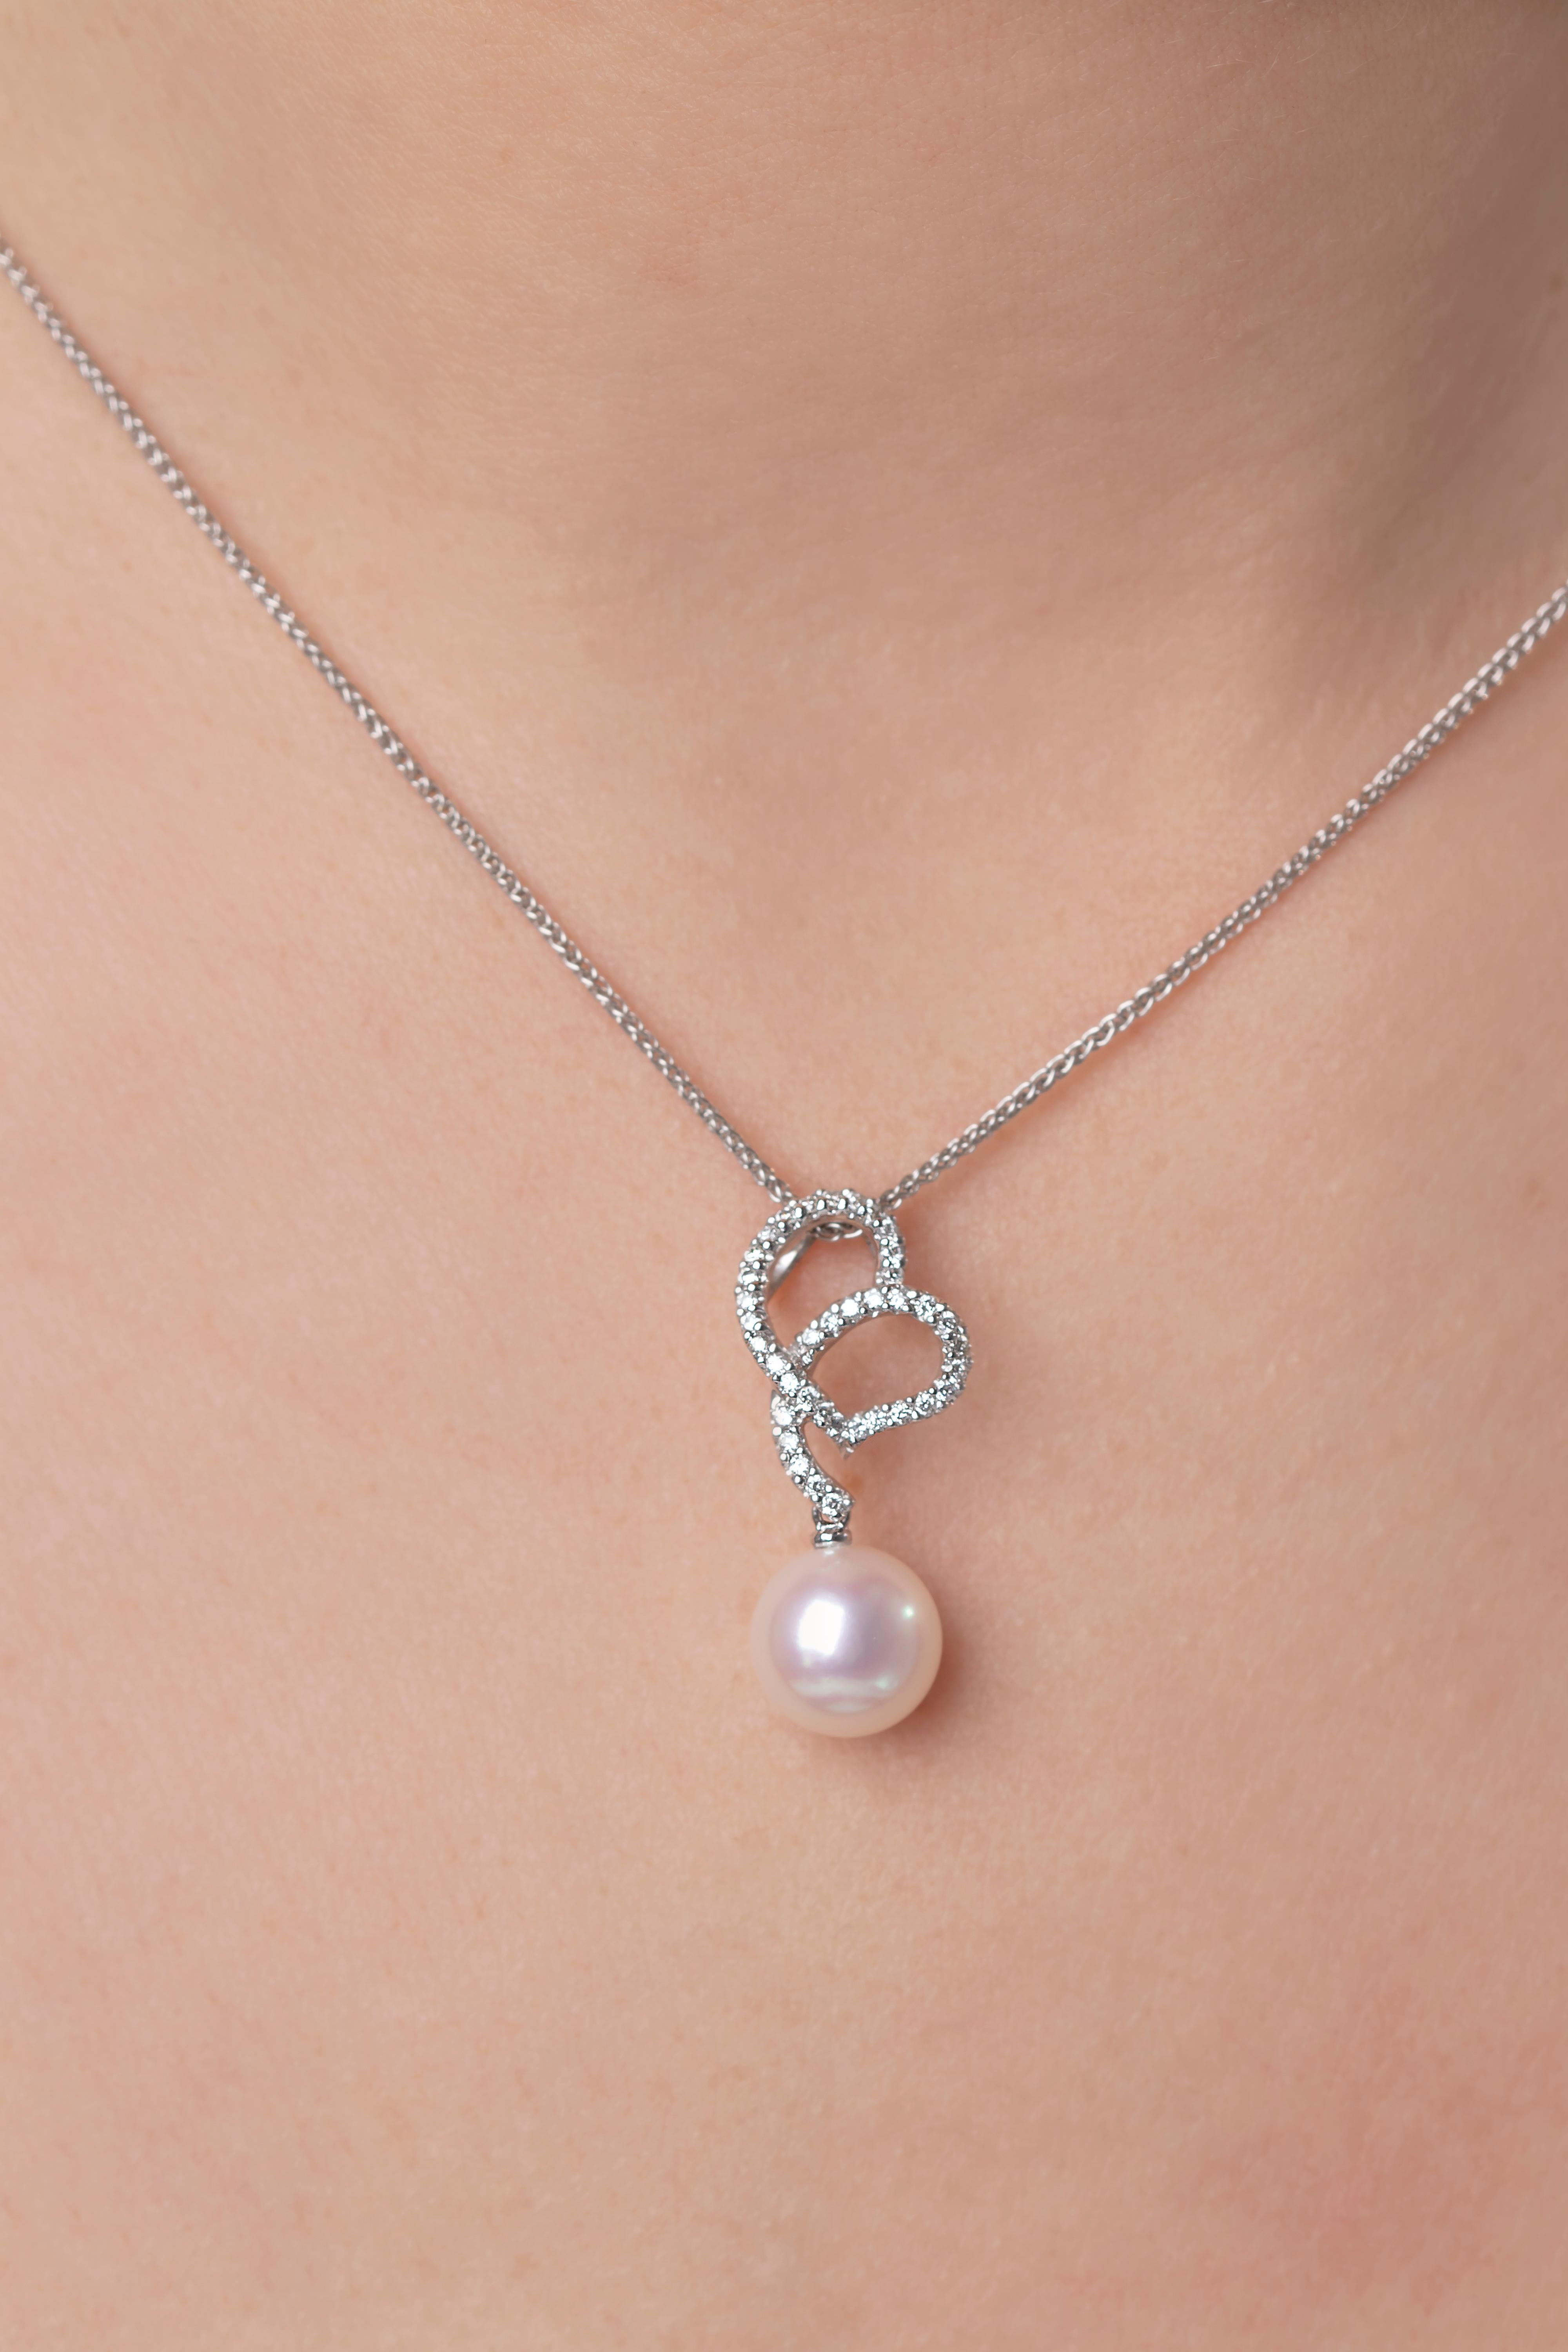 This elegant pendant by Yoko London features a stunning Cultured Freshwater Pearl suspended beneath a sparkling diamond heart-style motif. Easy to wear with any type of outfit, this daily-use pendant will add a touch of glamour to everything it is